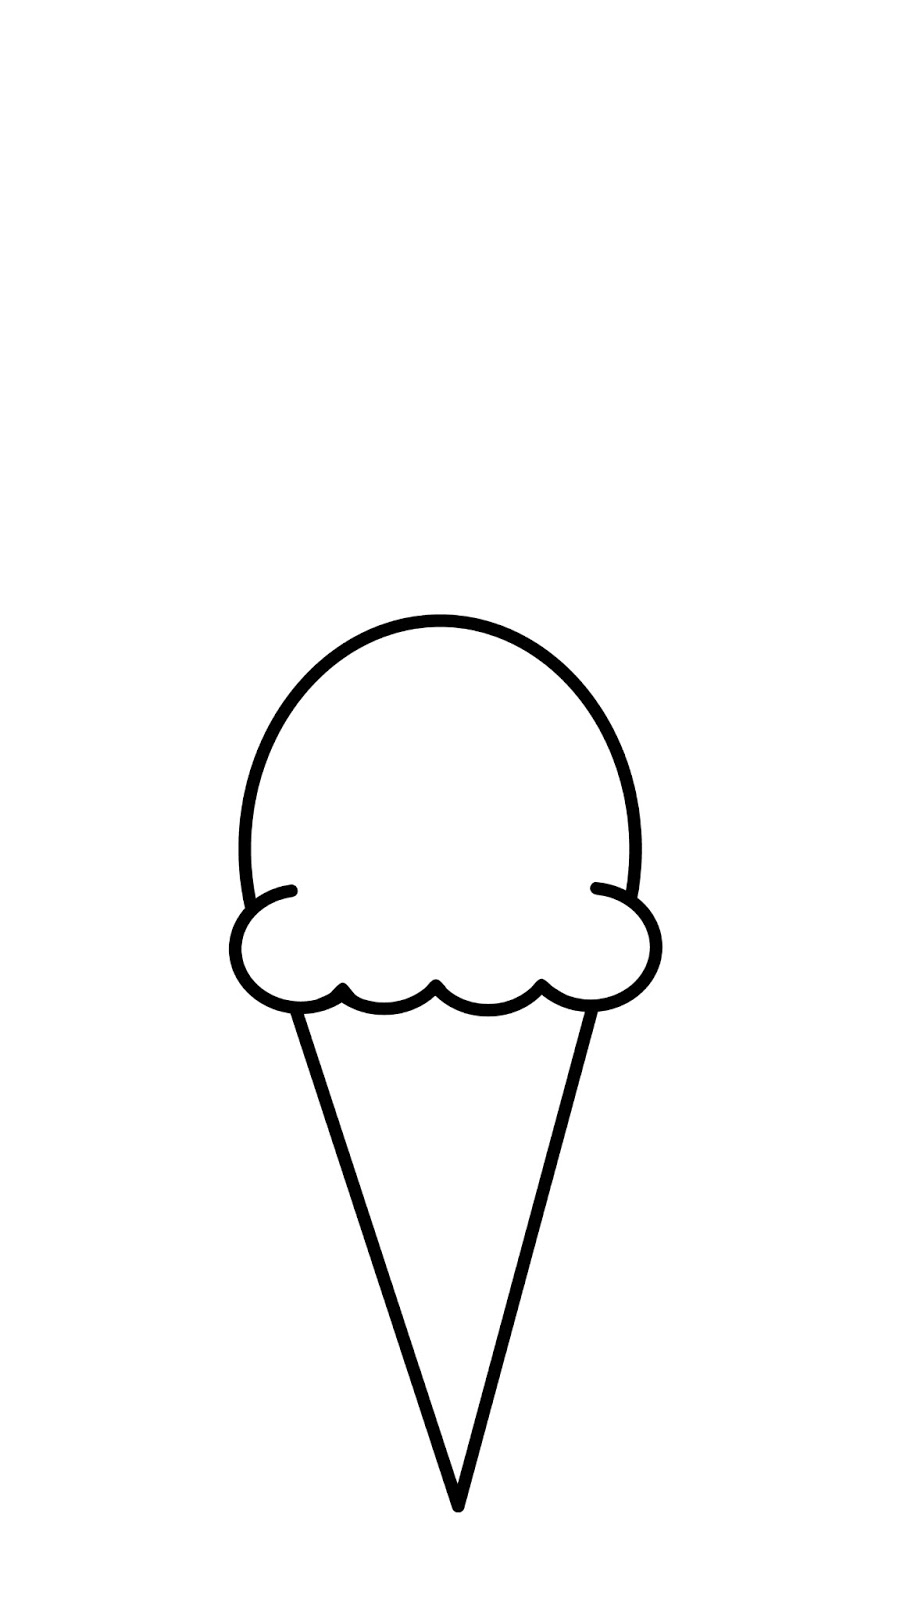 Ice Cream Drawing - ClipArt Best